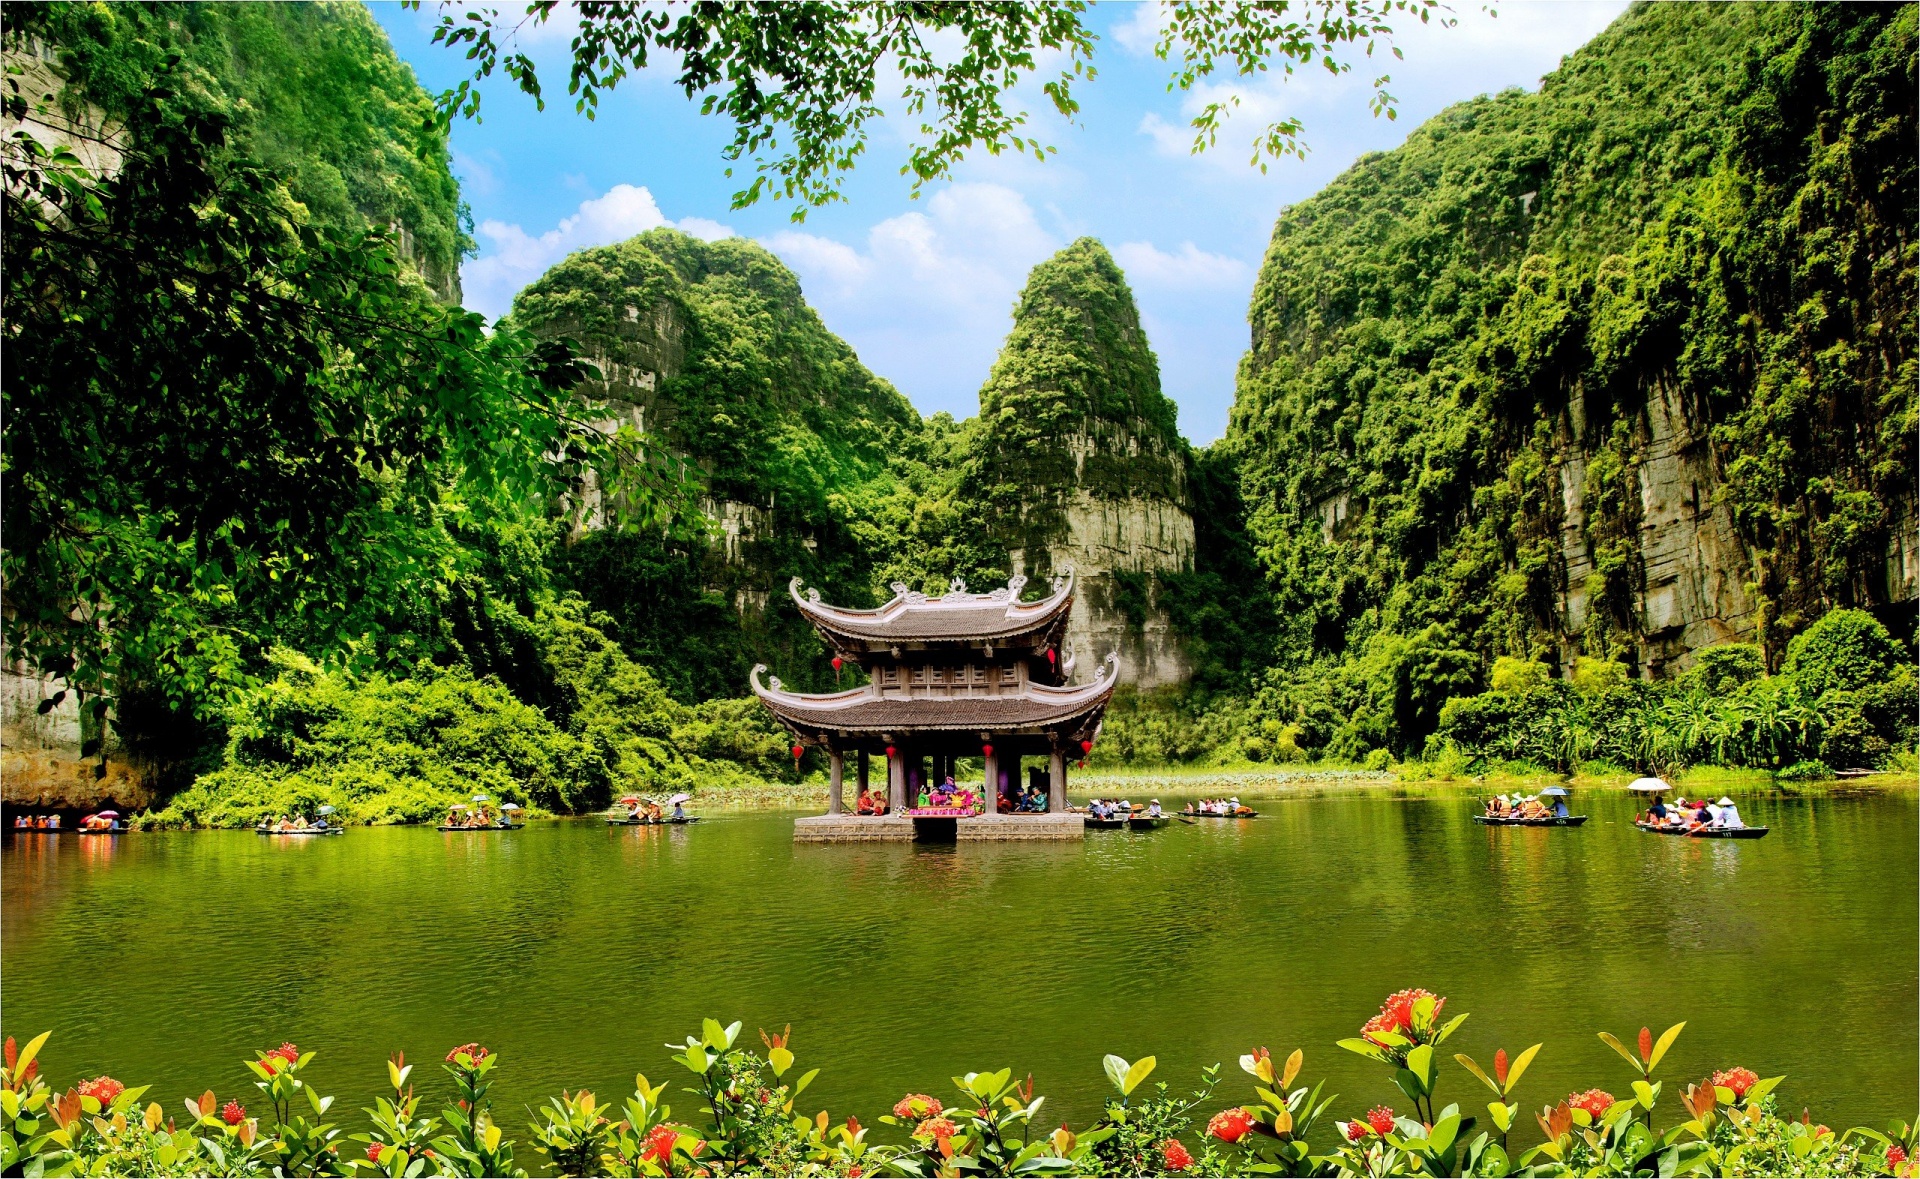 Ninh Binh ranks 4th in top 10 less-visited wonders of the world